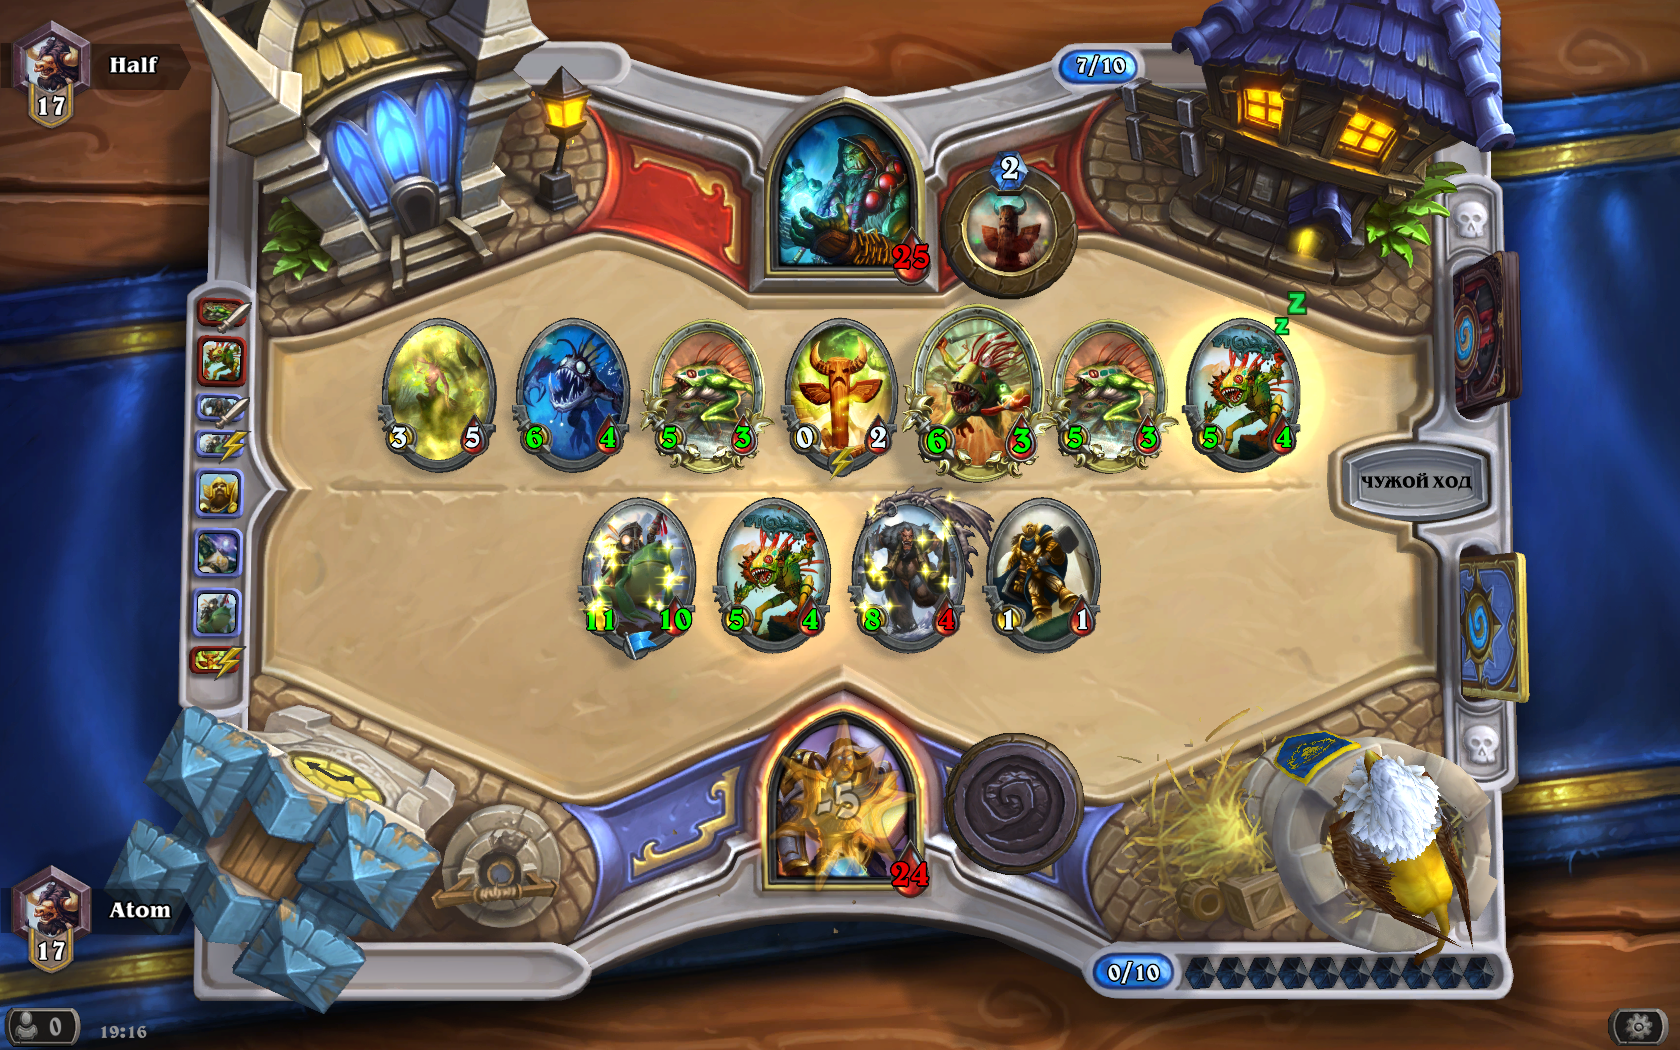 Hearthstone Screenshot 08-30-15 19.16.14.png- Viewing image -The Picture Ho...